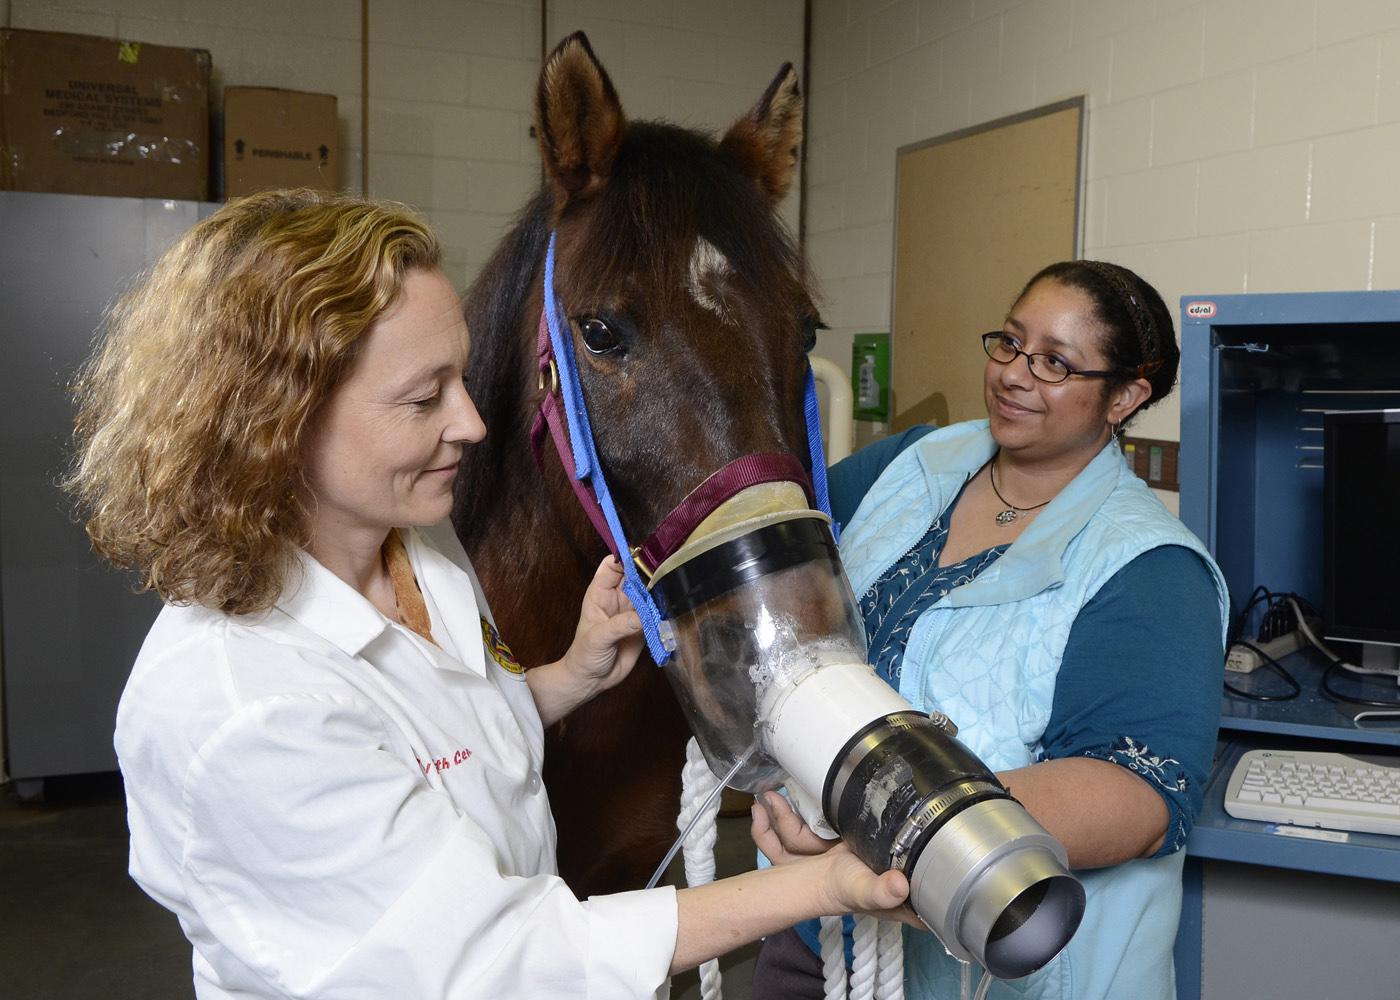 Drs. Cyprianna Swiderski (left) and Elizabeth Carothers perform lung function testing on Max, who suffers from an asthma-like condition. Swiderski's research is one of the studies at Mississippi State University's College of Veterinary Medicine designed to translate scientific advances from veterinary medicine to human medicine. (Photo by MSU College of Veterinary Medicine/Tom Thompson)